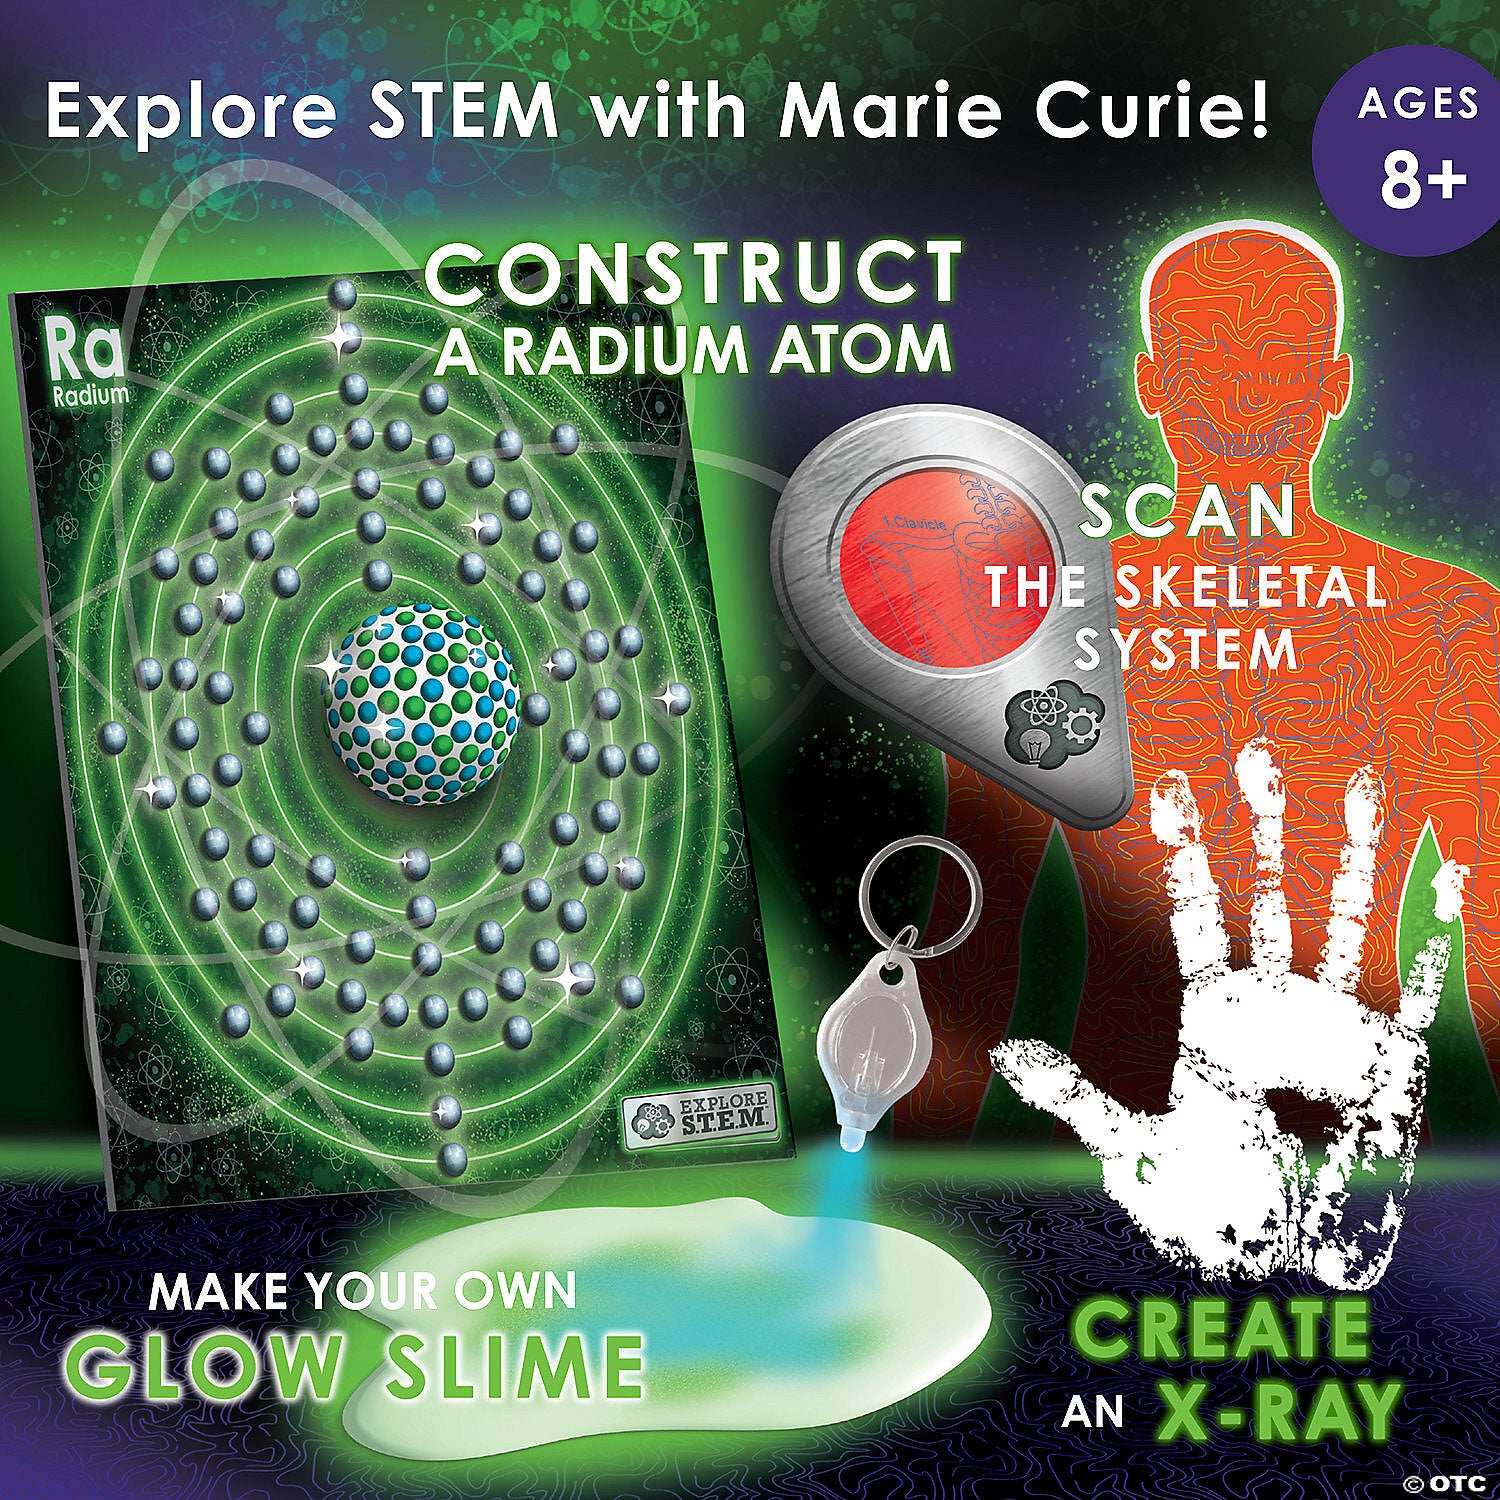 Explore S.T.E.M. with Marie Curie